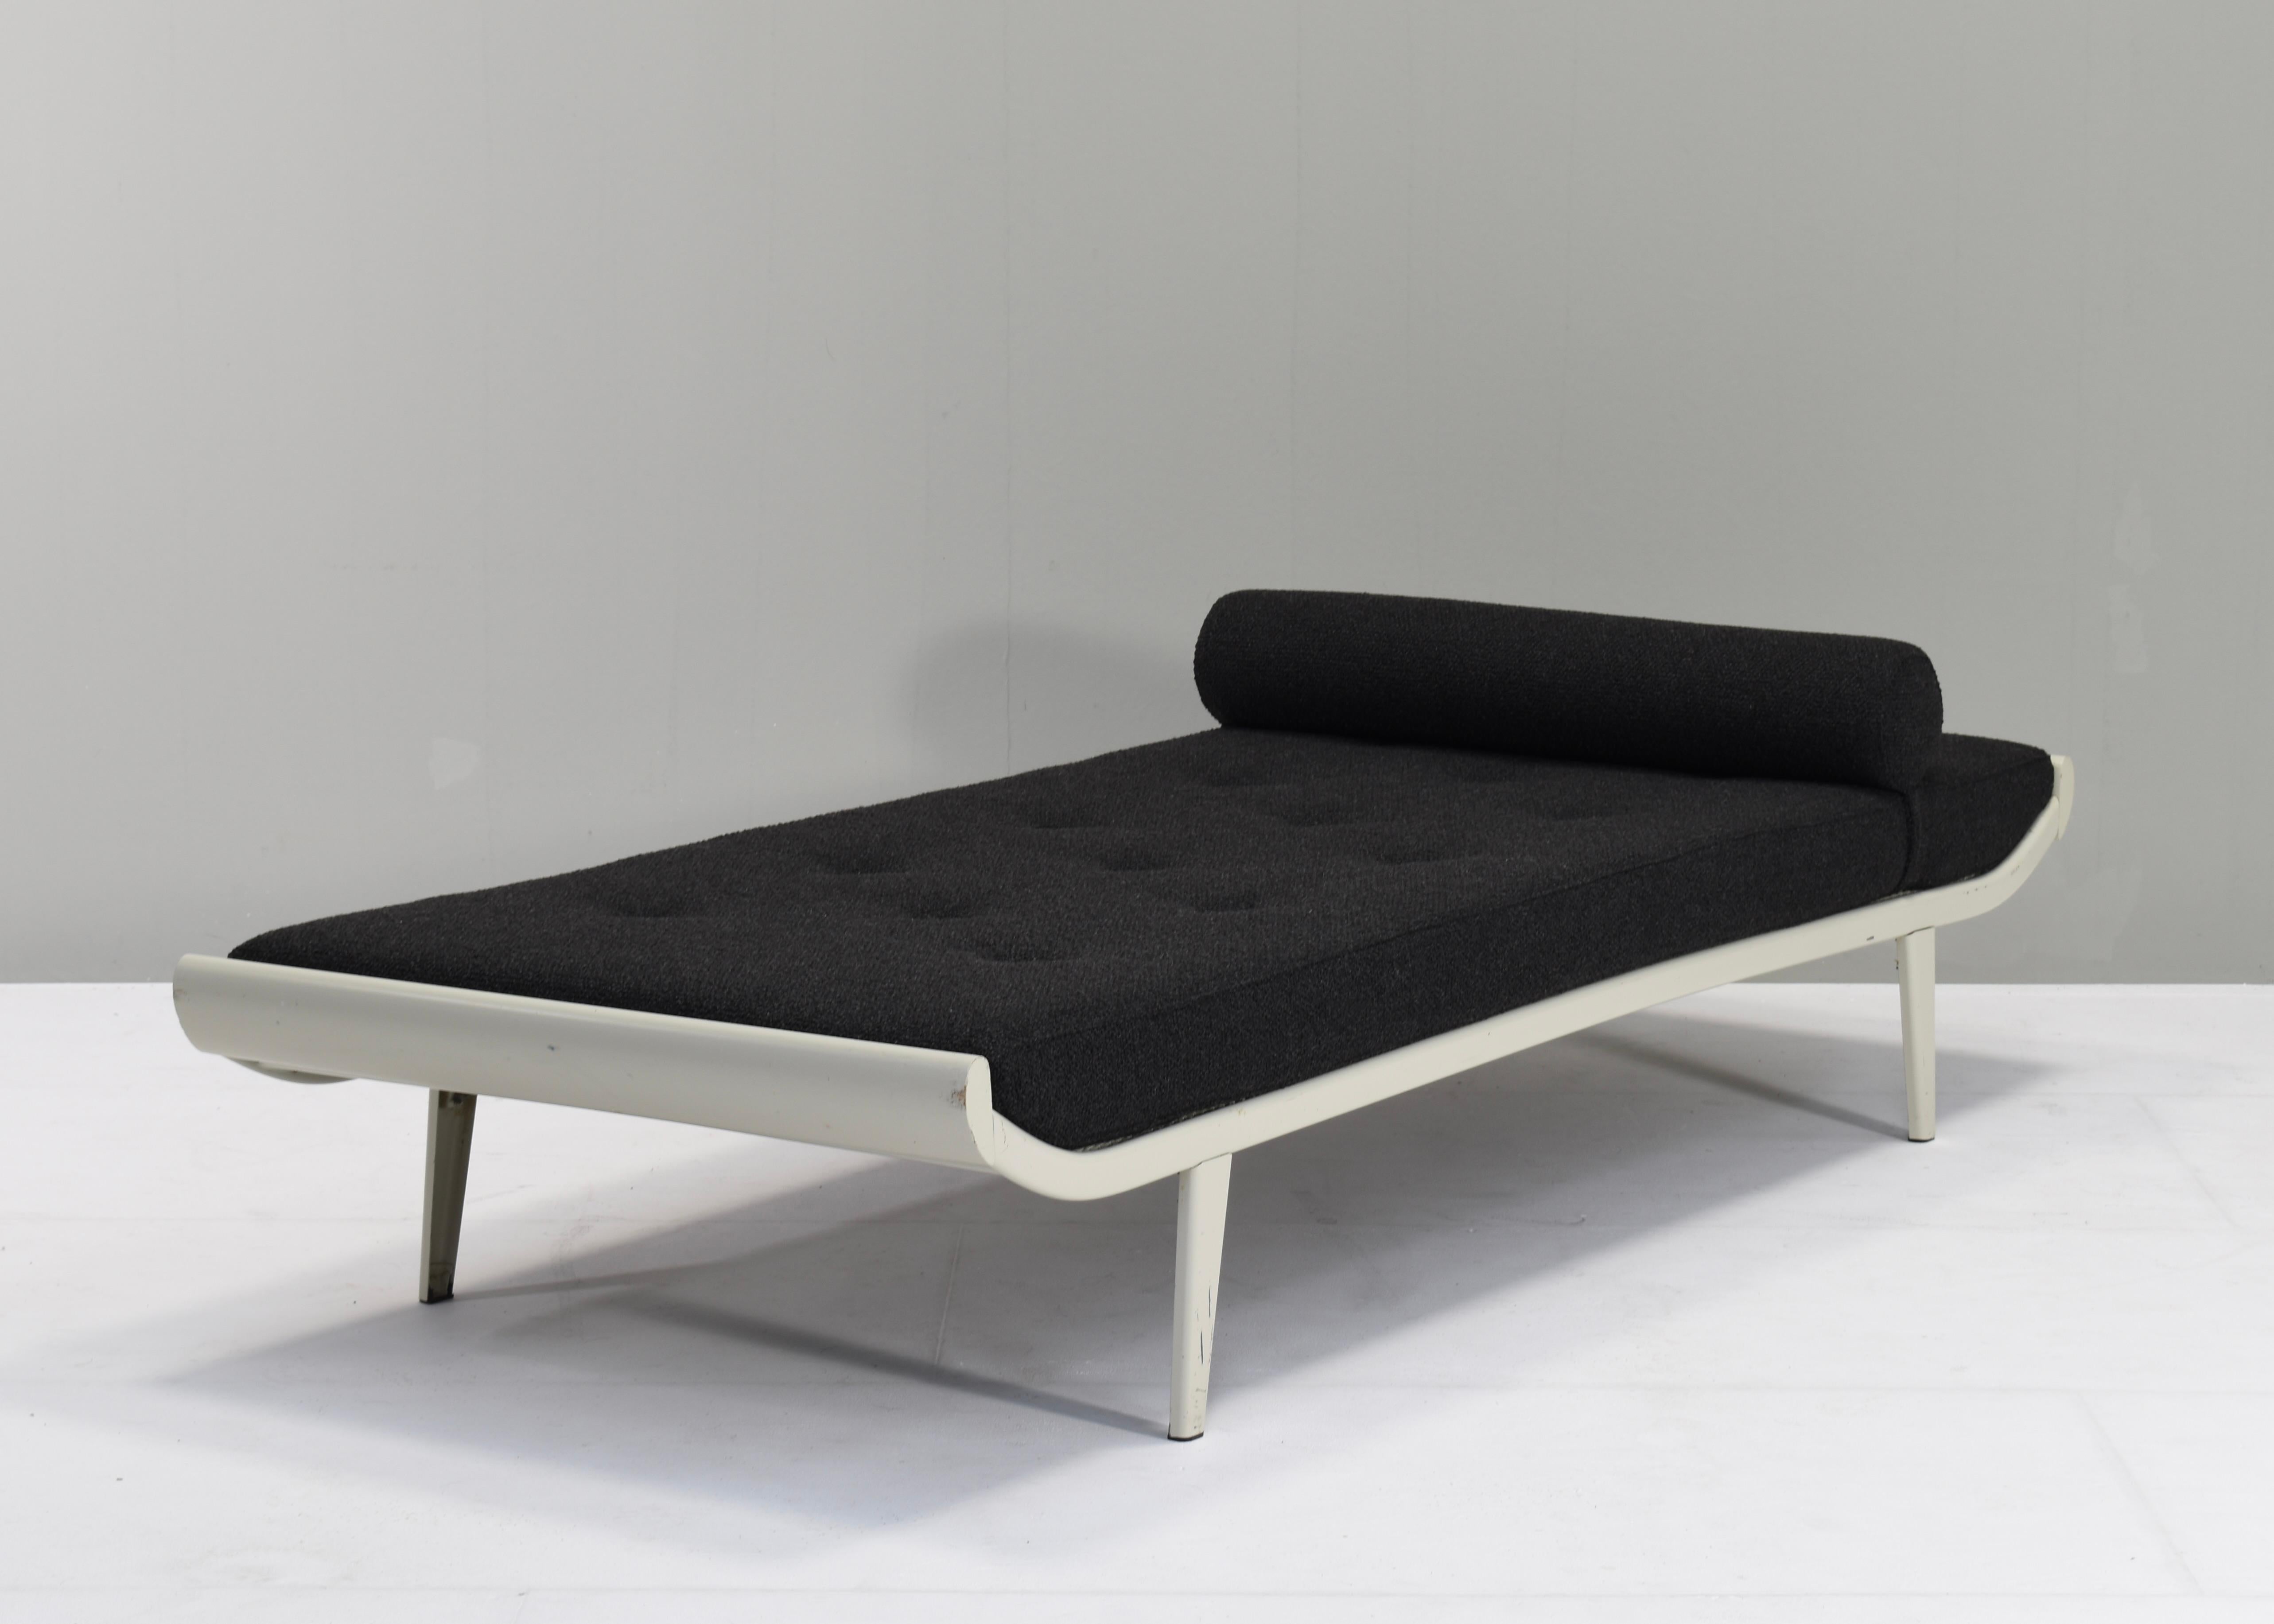 Metal Cleopatra Daybed by Cordemeijer for Auping in New Upholstery, Netherlands, 1954